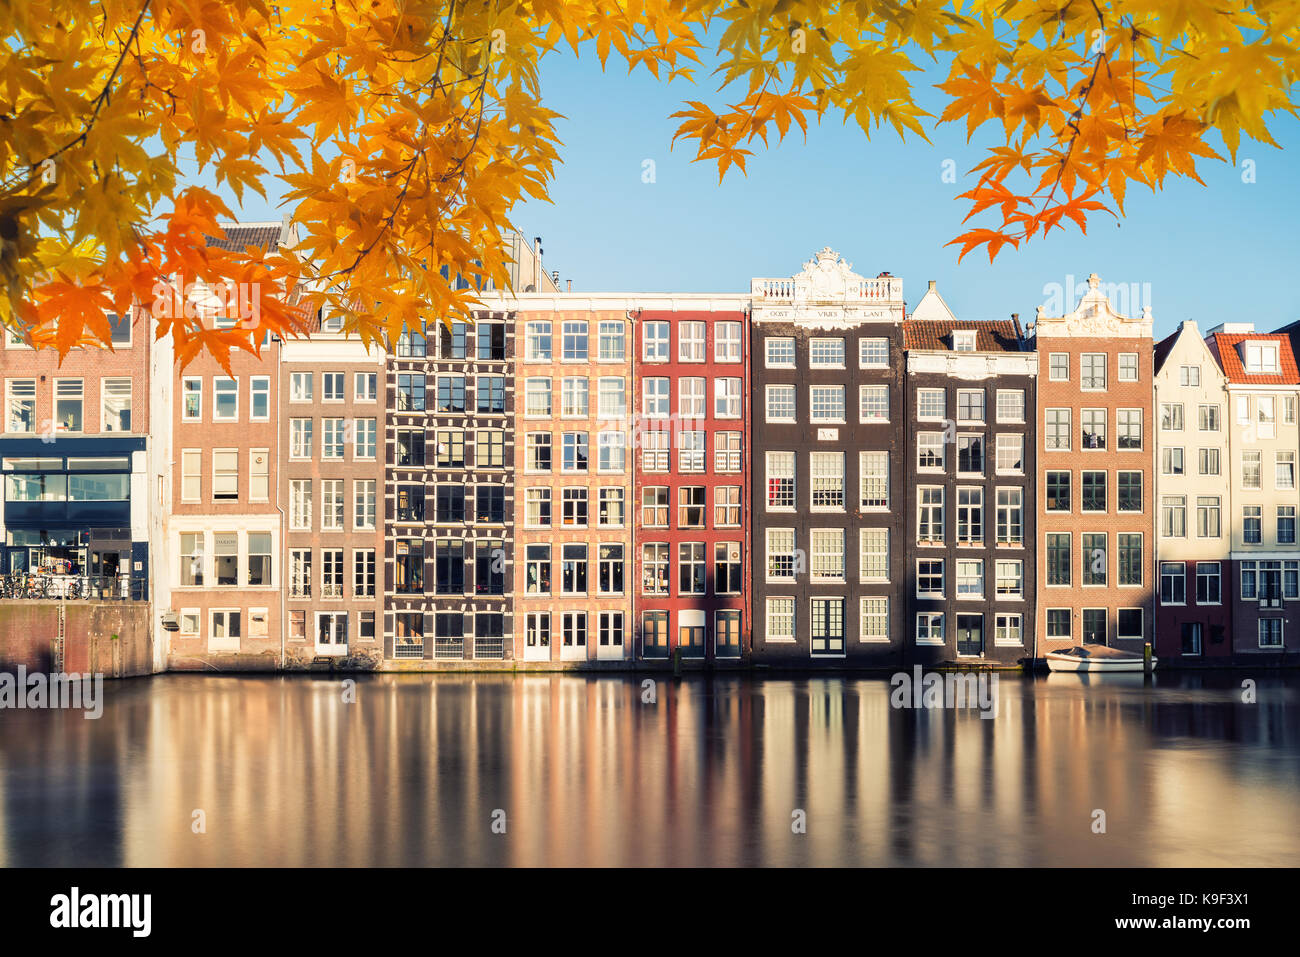 Autumn season at Amsterdam street traditional ancient dutch colorful buildings with canal in Amsterdam, Netherlands. Stock Photo